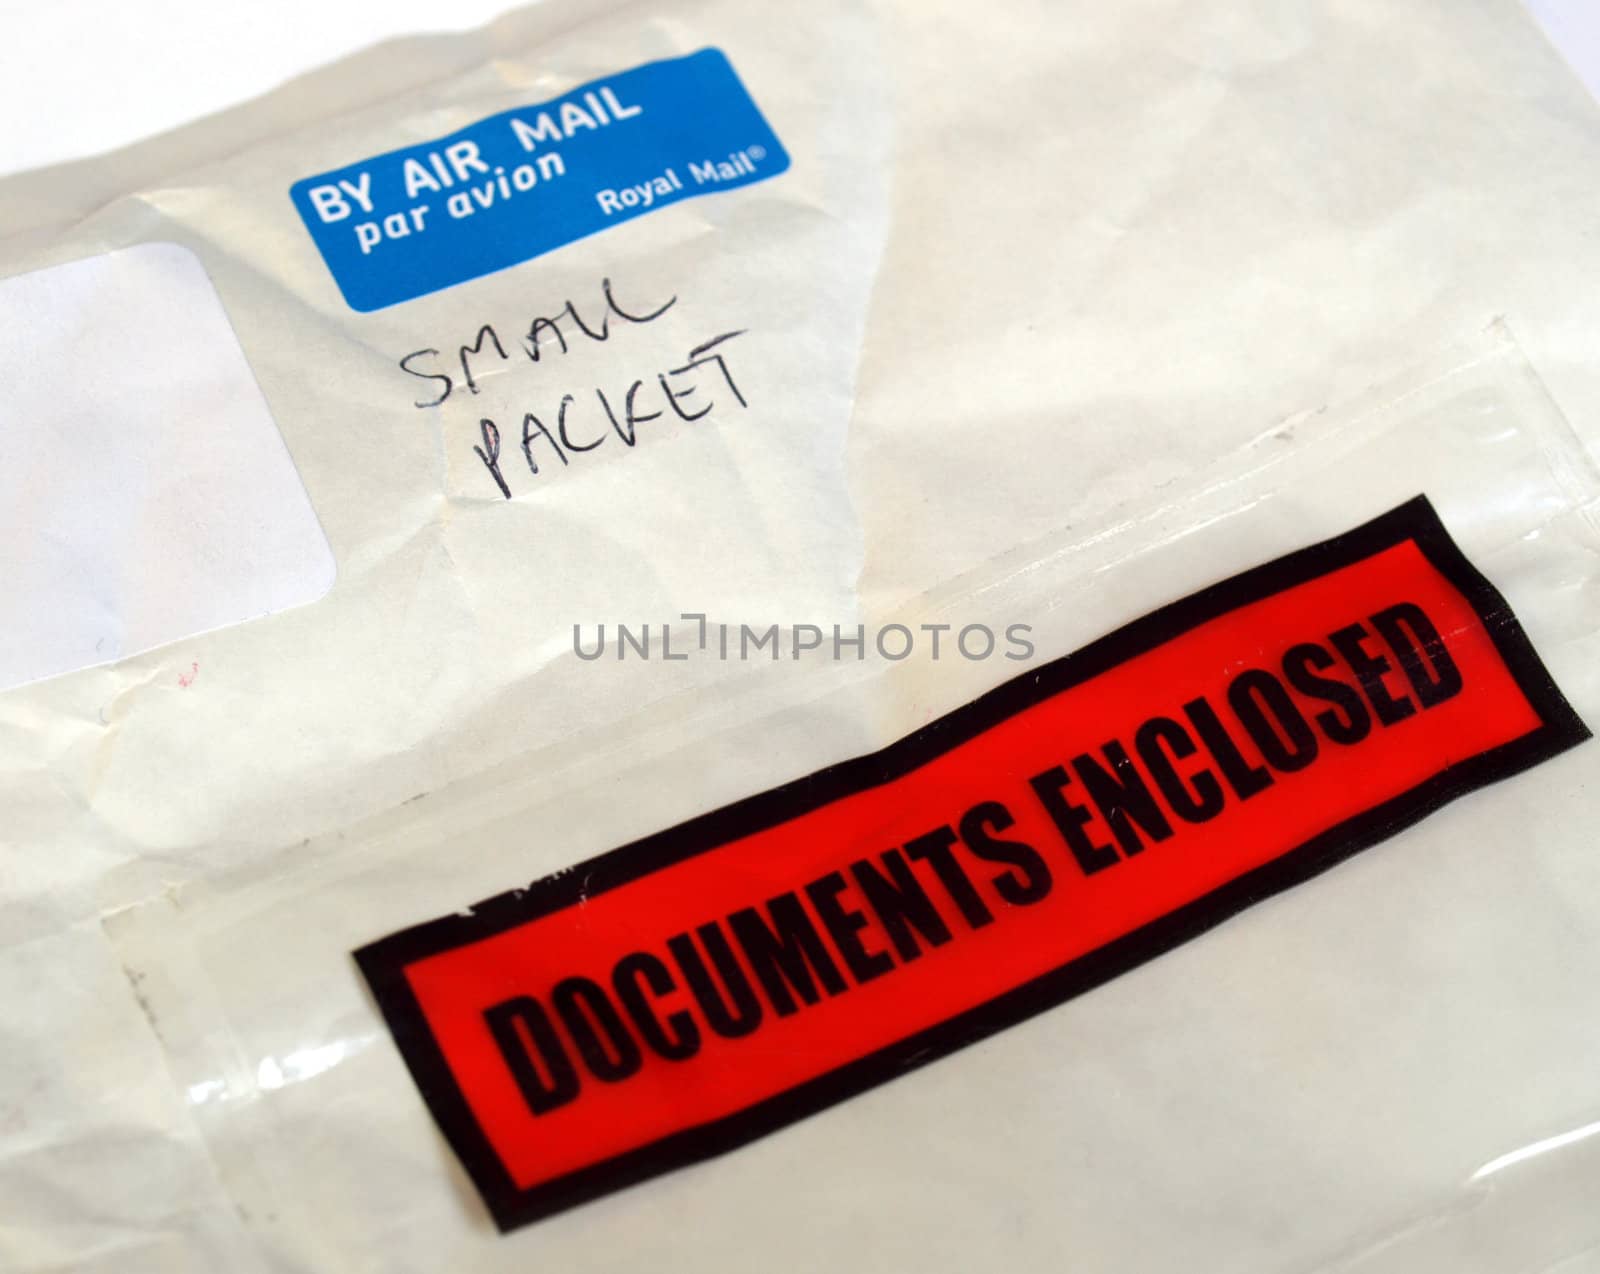 Letter or small packet envelope with documents inclosed